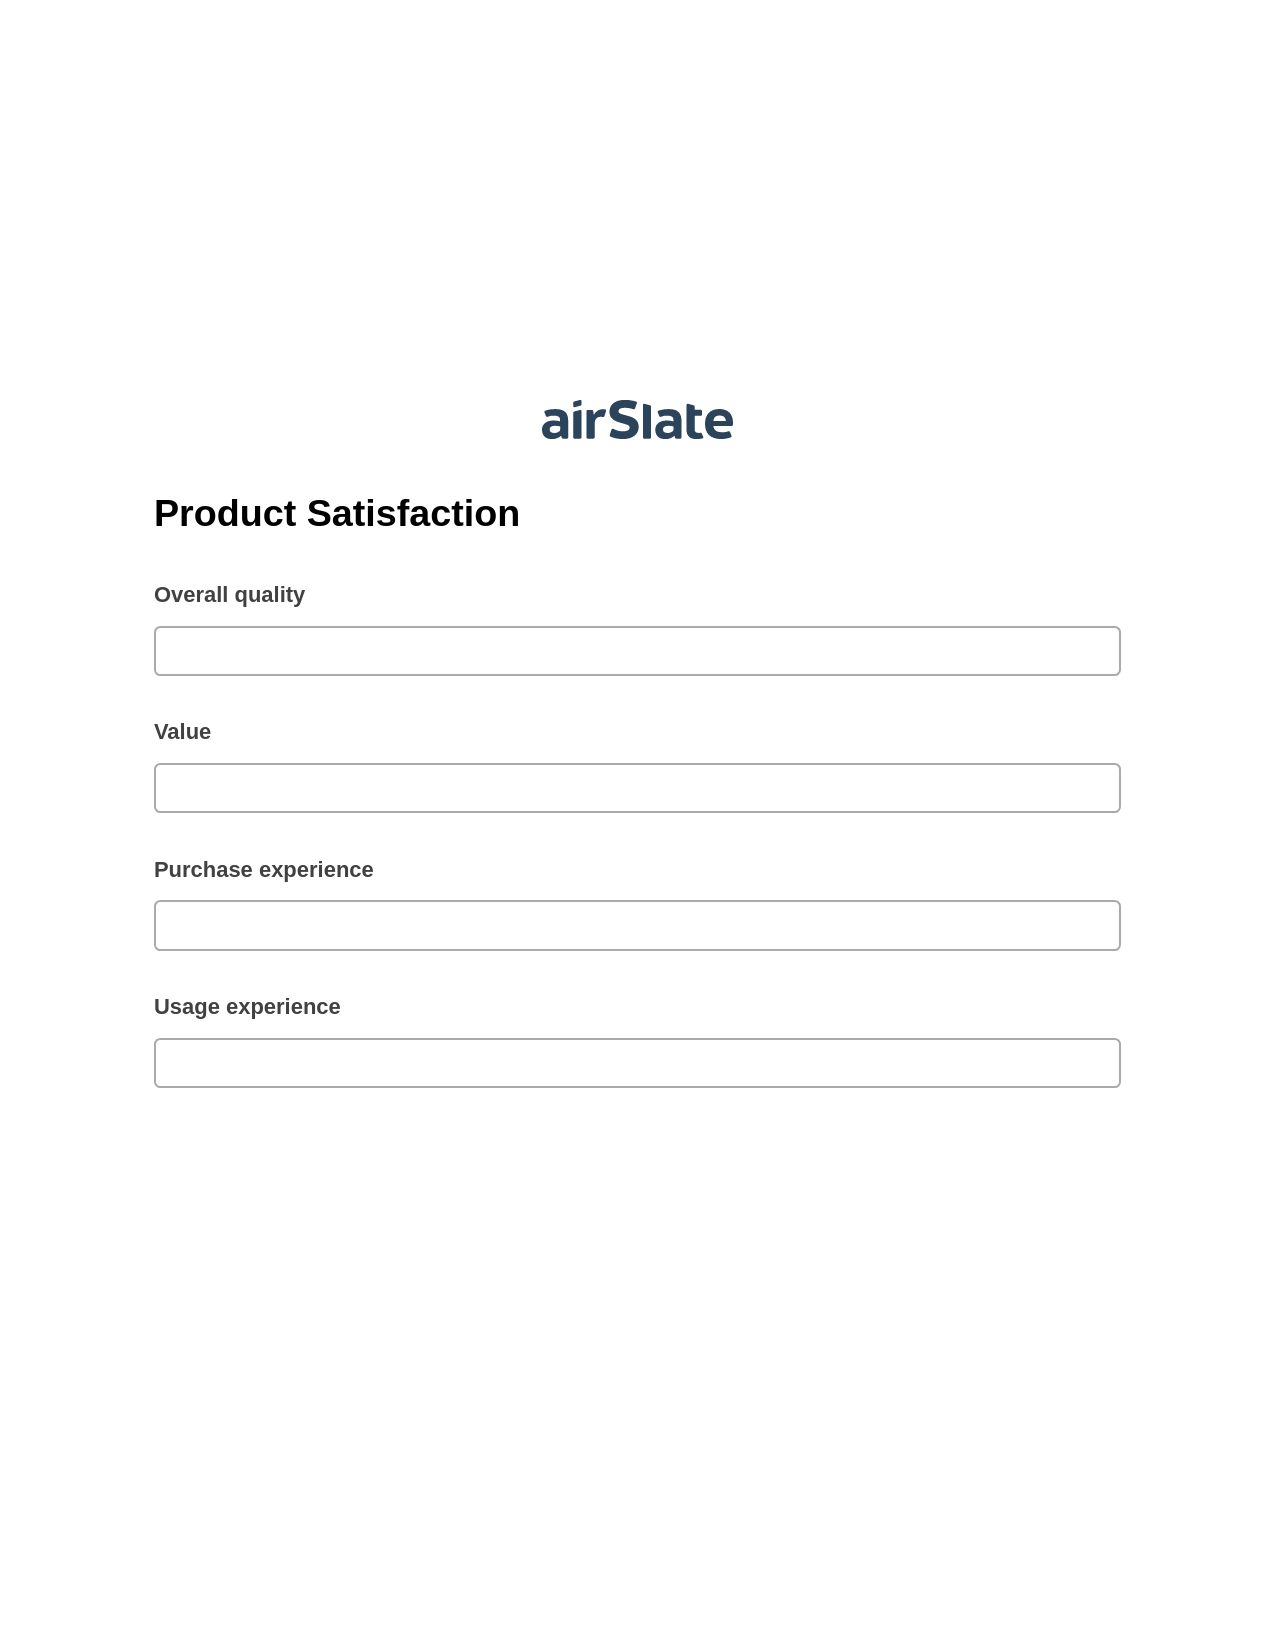 Product Satisfaction Pre-fill from CSV File Bot, Invoke Salesforce Process Bot, Archive to SharePoint Folder Bot